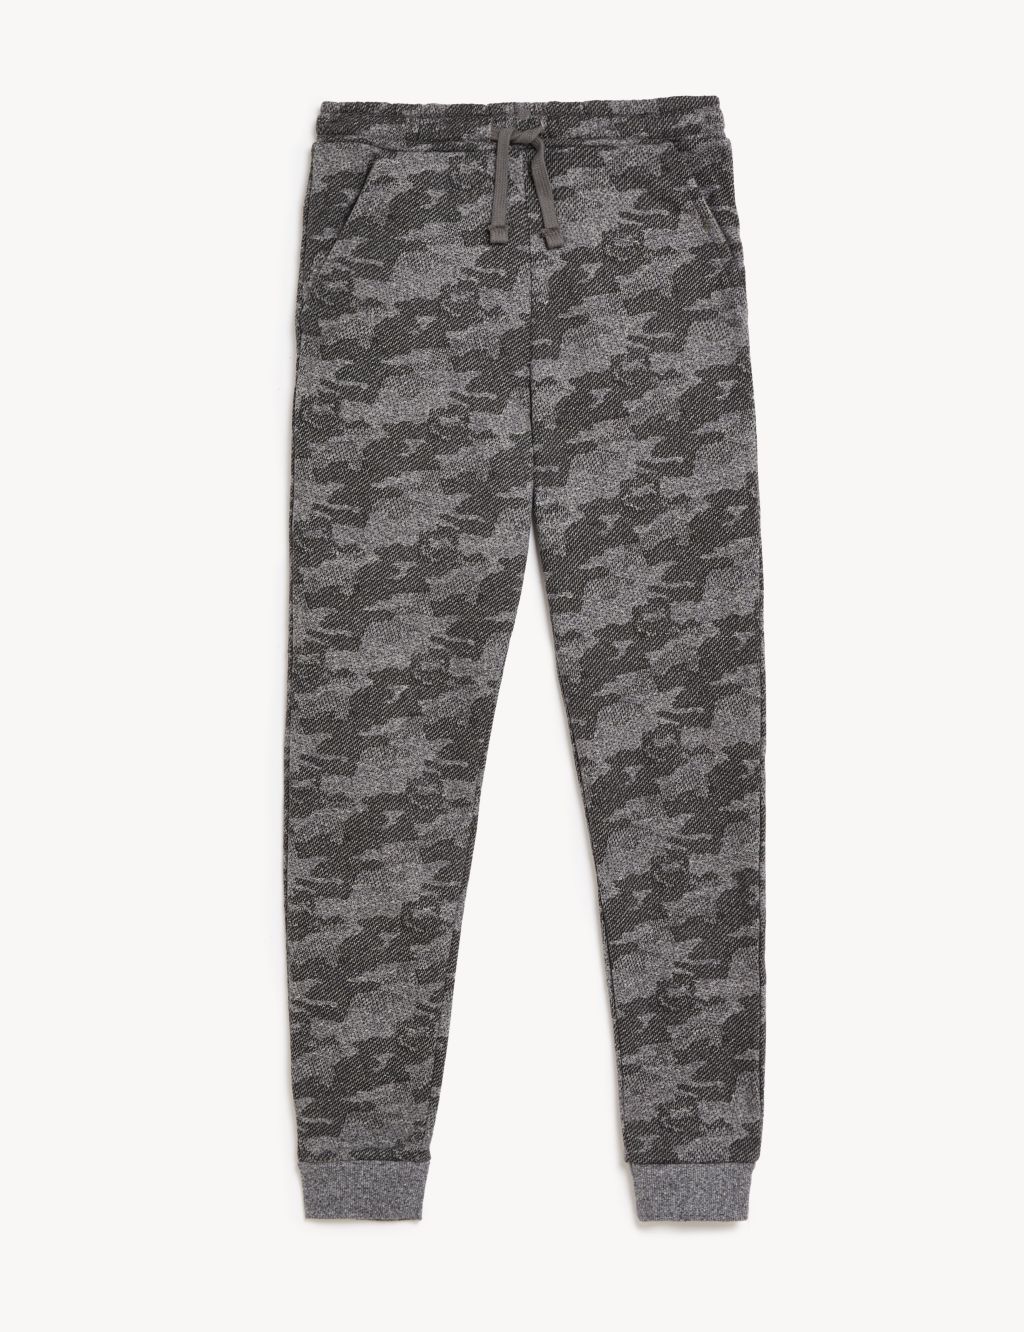 Cotton Rich Camouflage Joggers (6-16 Yrs) image 1